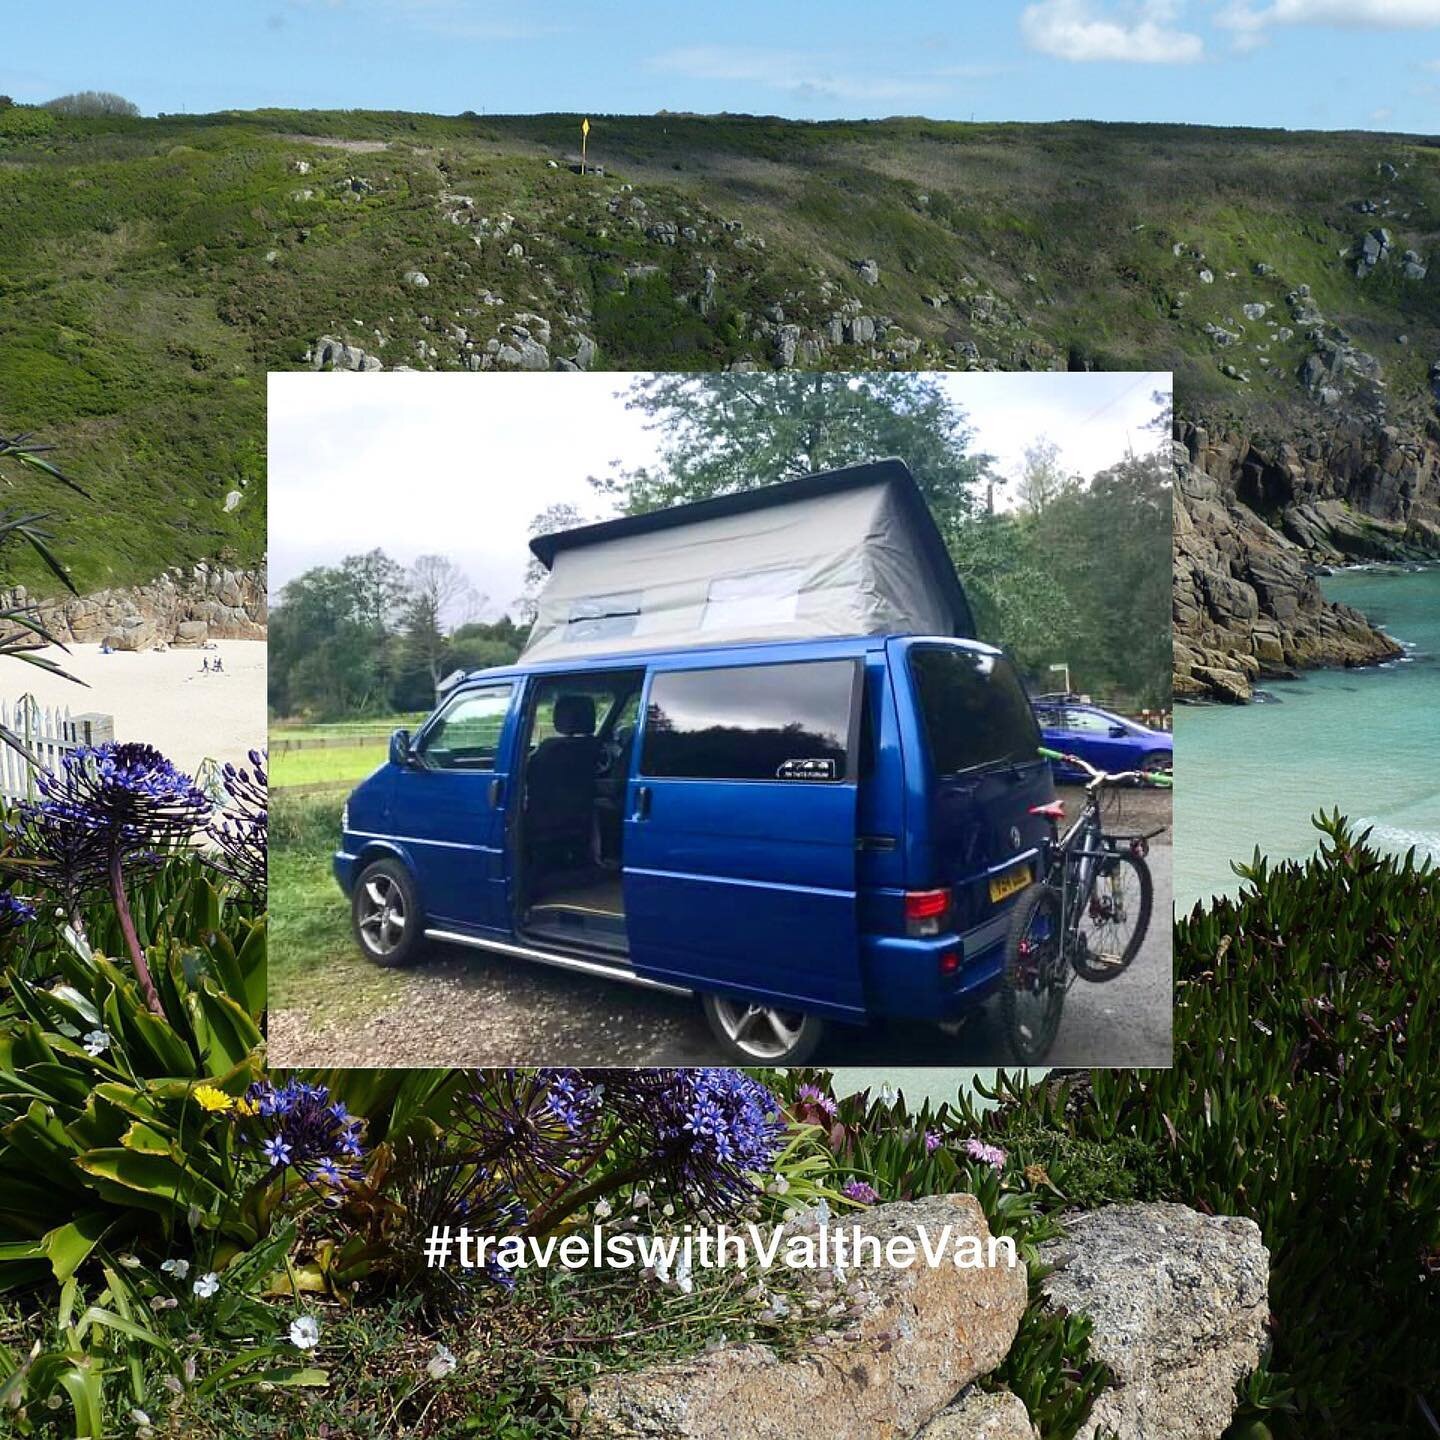 All booked and can&rsquo;t wait to go on my travels! The great thing about being a virtual assistant is that I can work remotely and still help my clients so it&rsquo;s a win win!!
.
.
.
#cornwallcamping #campervantravels #virtualassistant #valife #w